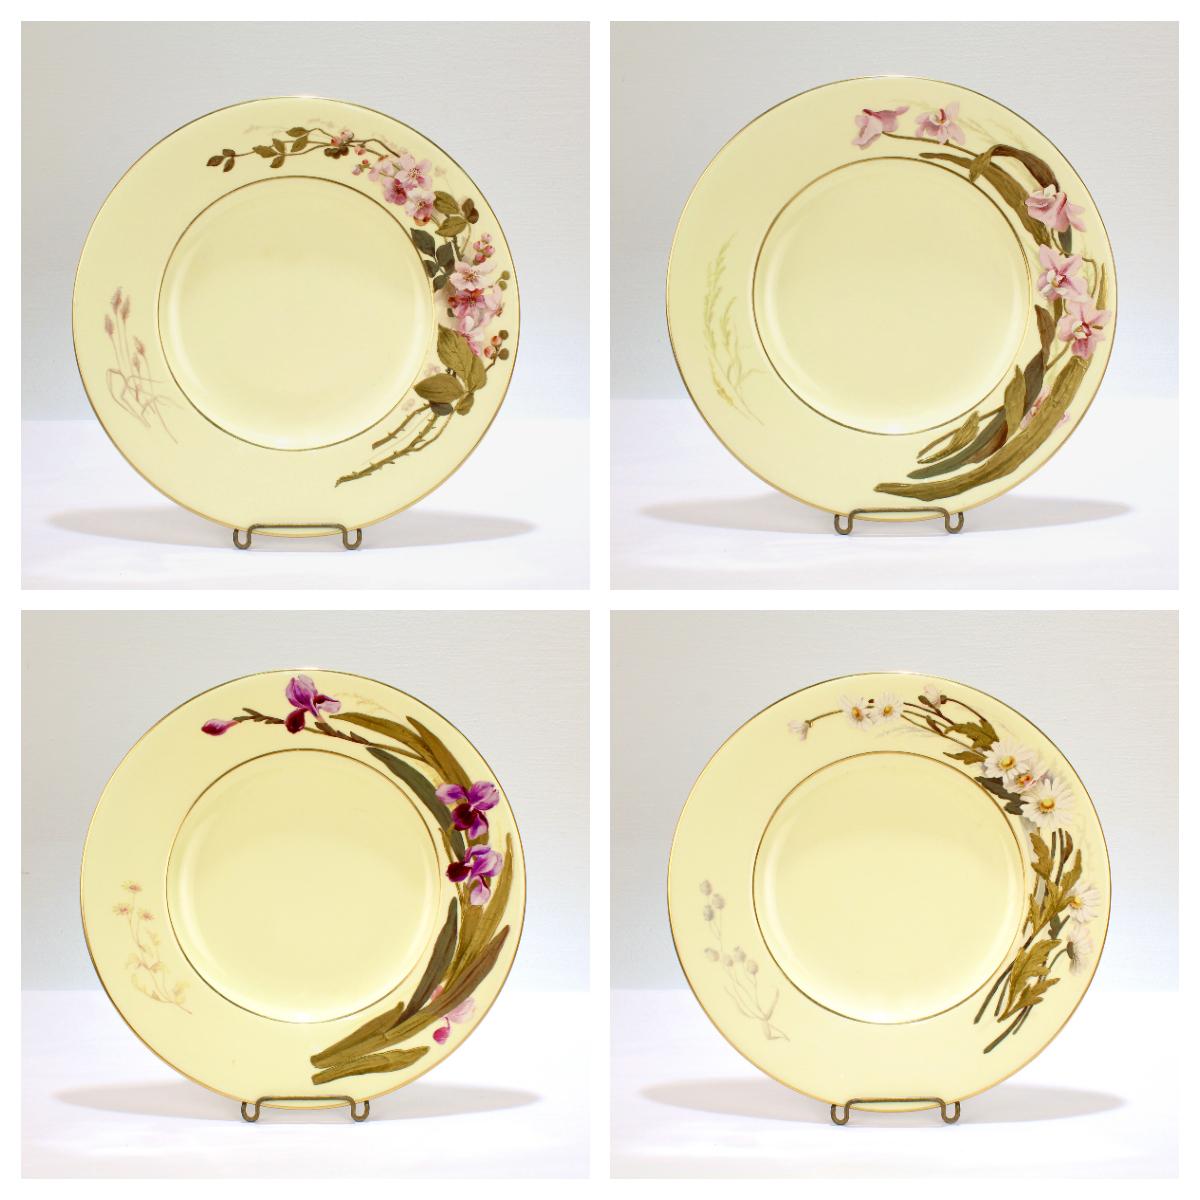 An incredibly fine set of 8 Worcester porcelain plates.

With raised, enameled flowers to the borders on a custard colored ground. 

Each flower is layered. The bottom layer has painted leaves, stems, and foliage. The top layers include